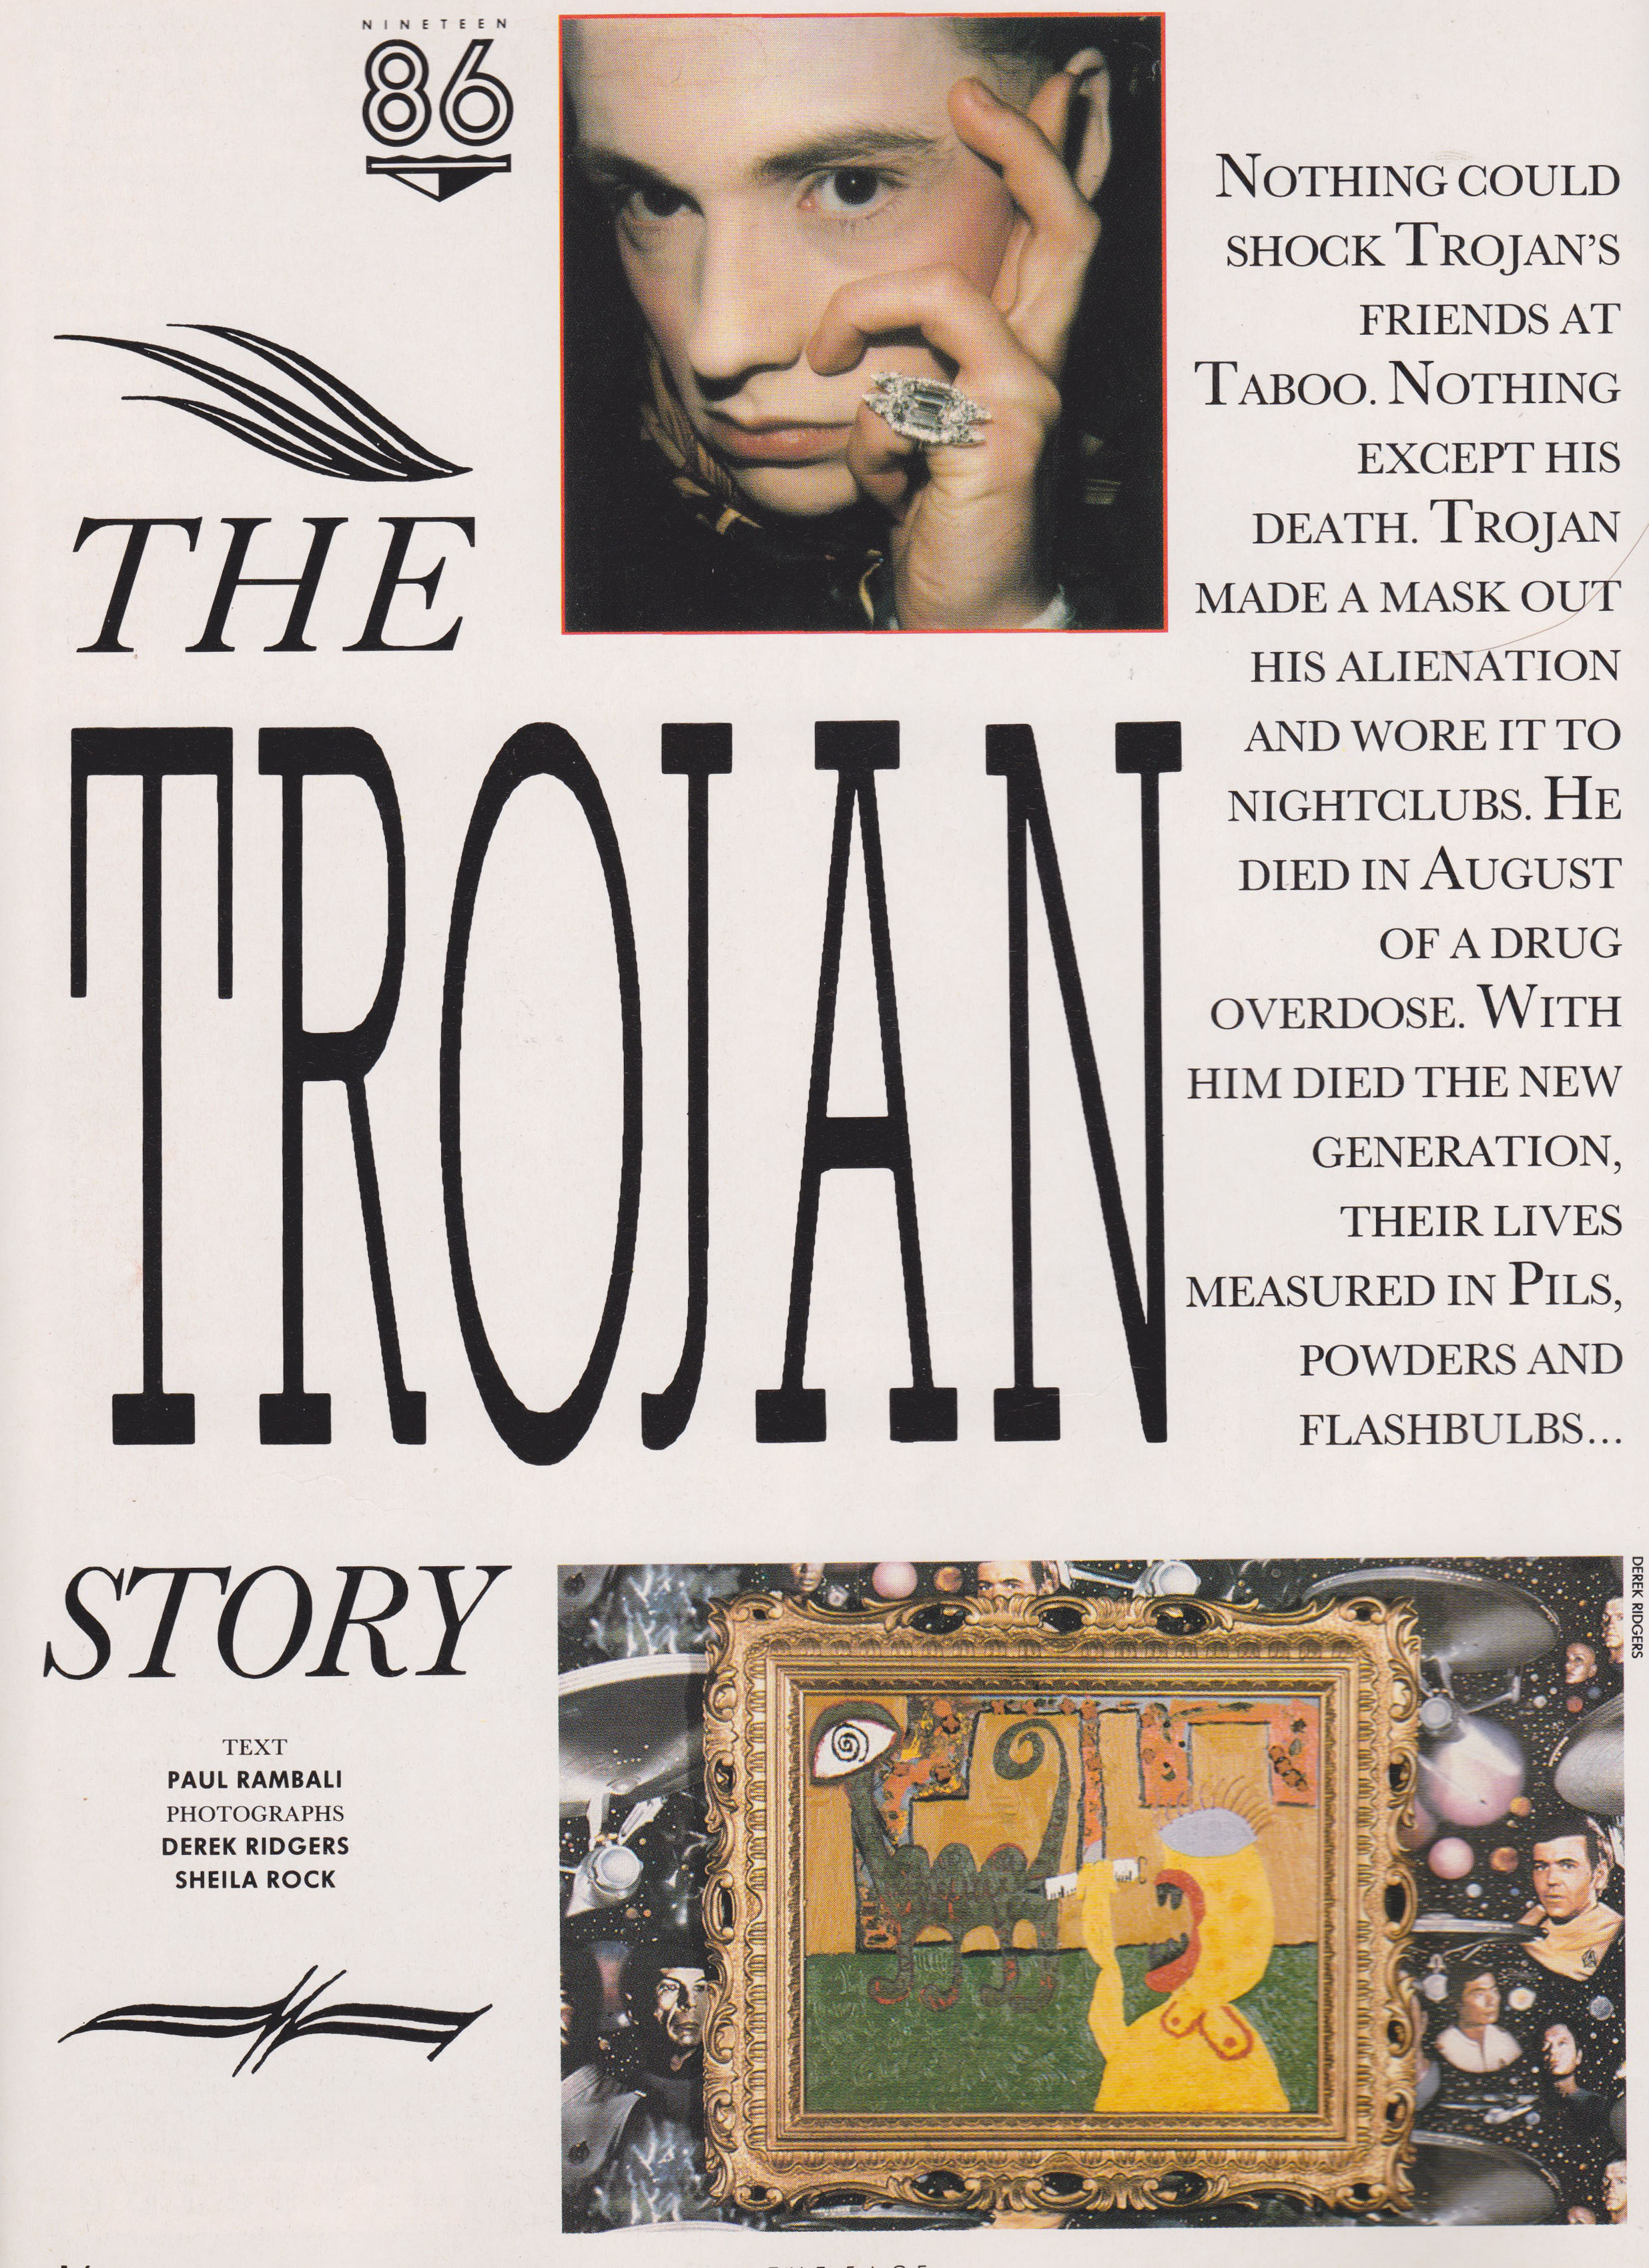 The Torjan Story, The Face, January, 1987, Leigh Bowery, Taboo, 